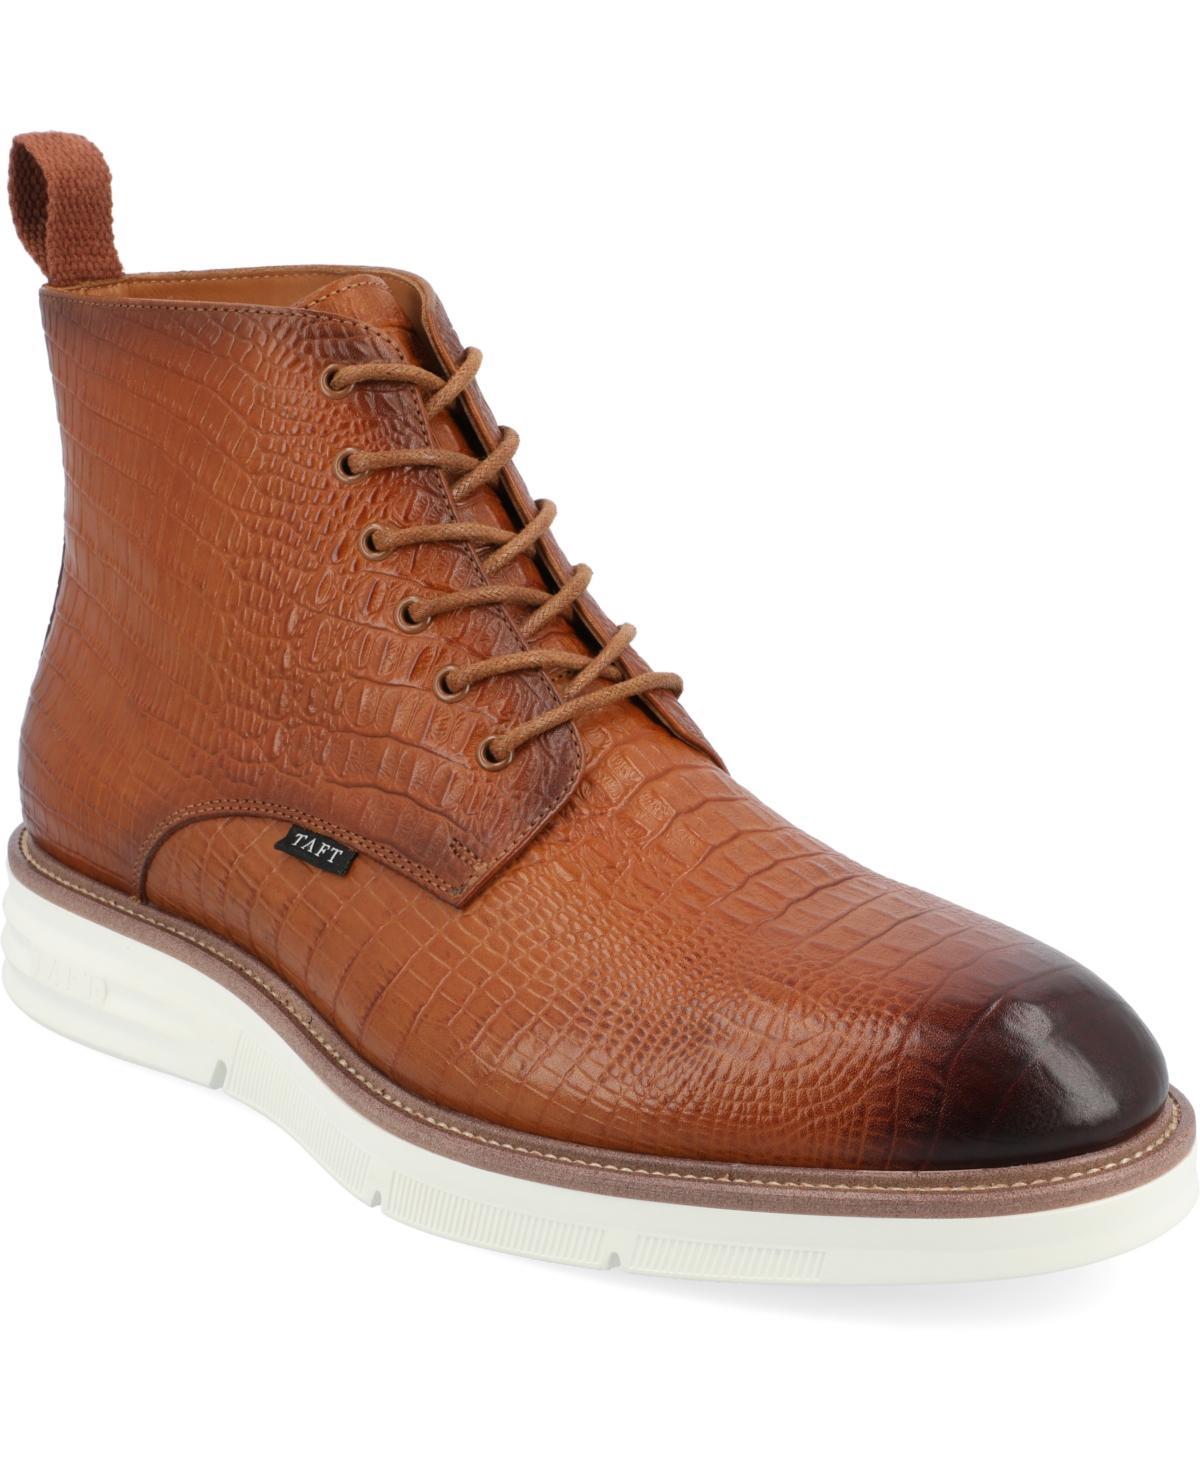 TAFT 365 Croc Embossed Leather Boot Product Image